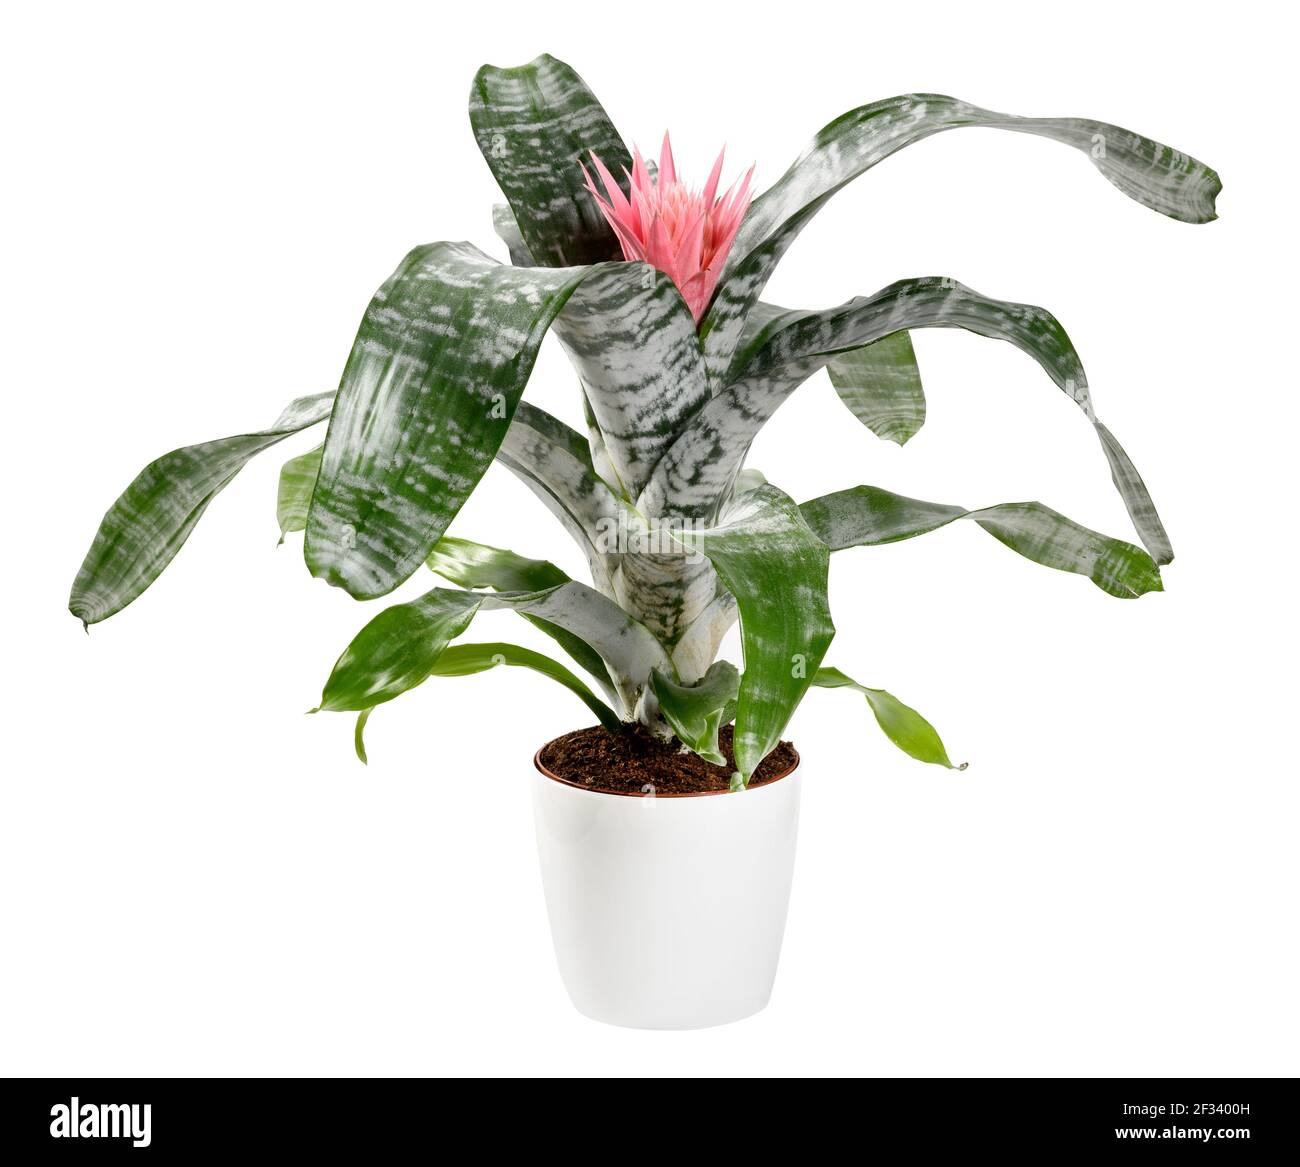 Potted Bromelia aechmea primera plant with its decorative silver green variegated leaves and a single spiky pink flower in a container isolated on whi Stock Photo